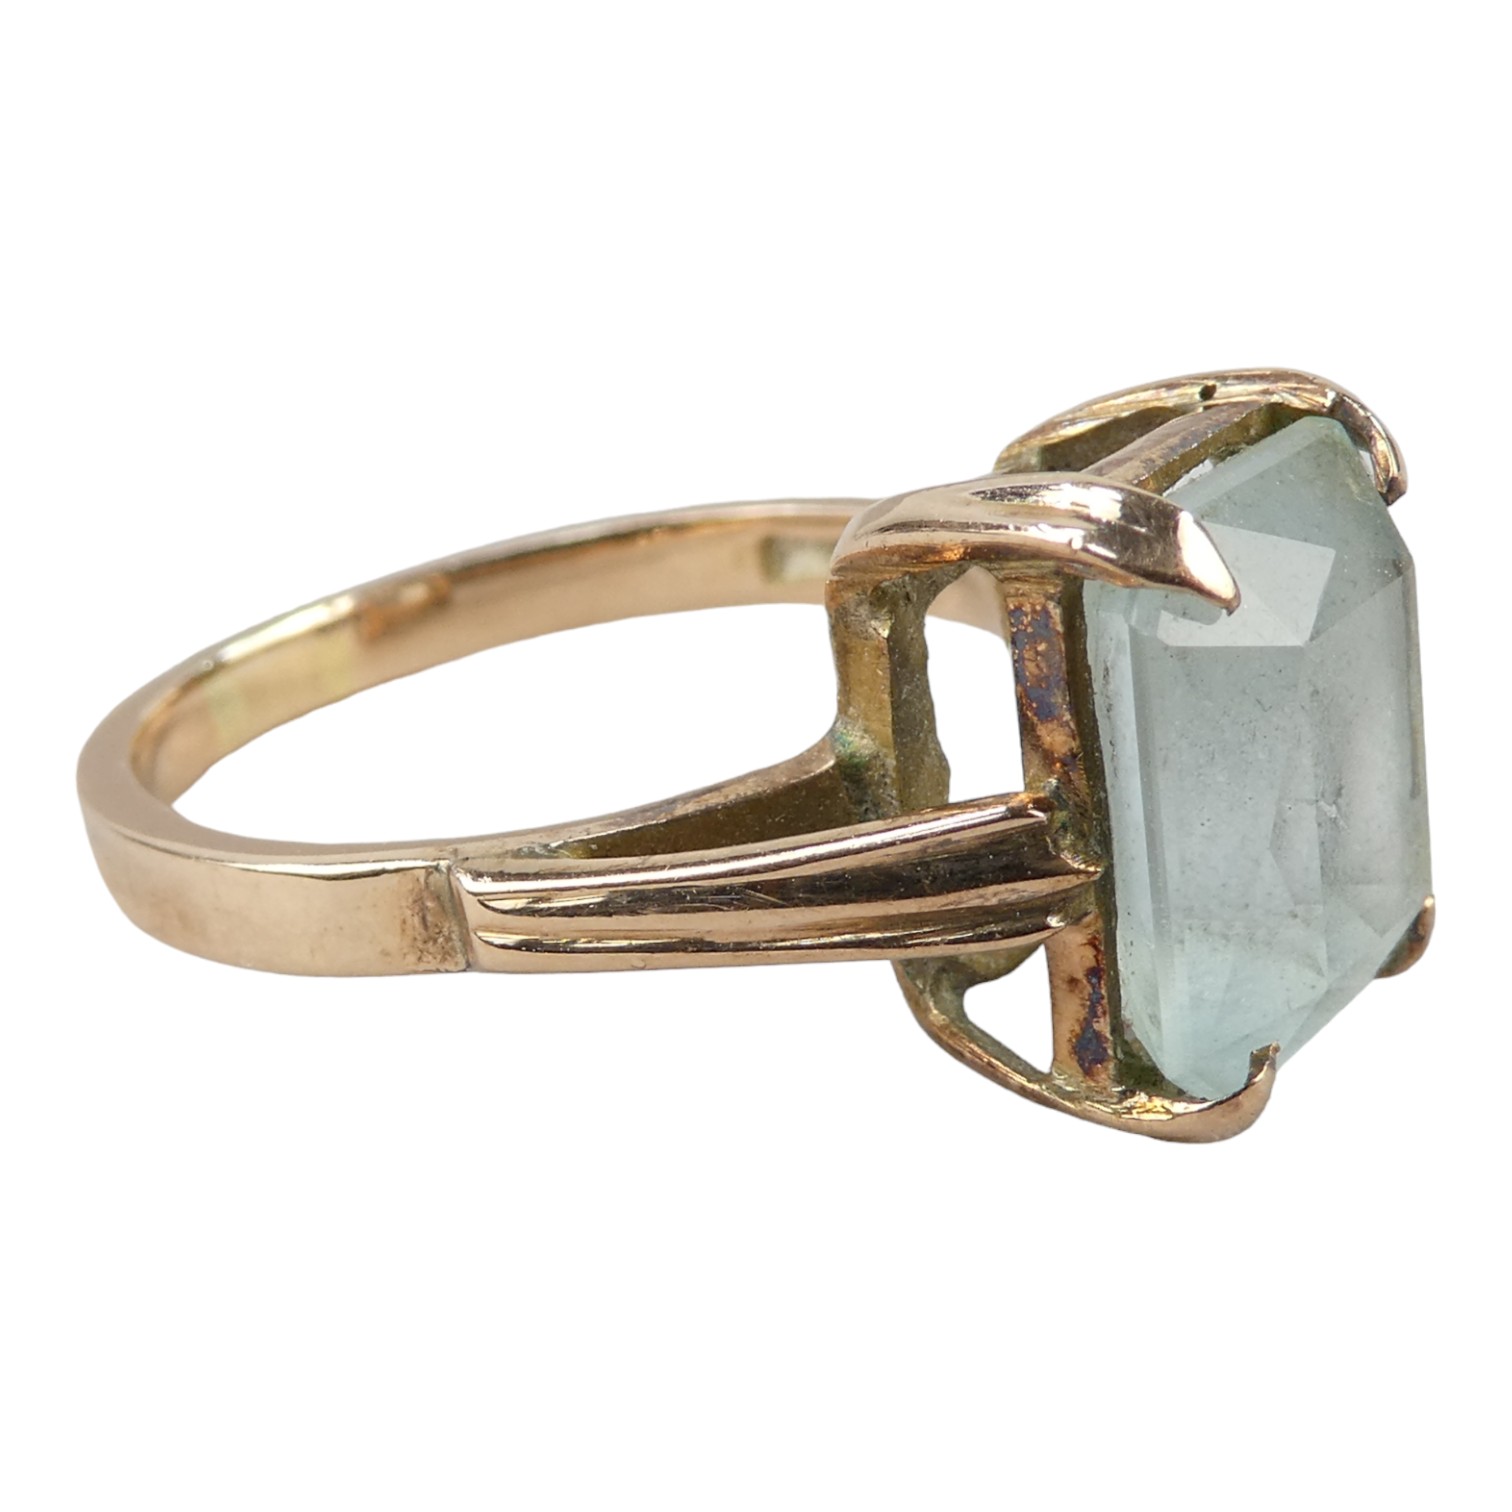 A 15ct gold ring - claw set with an emerald cut light blue stone, size O, weight 4.8g. - Image 2 of 4